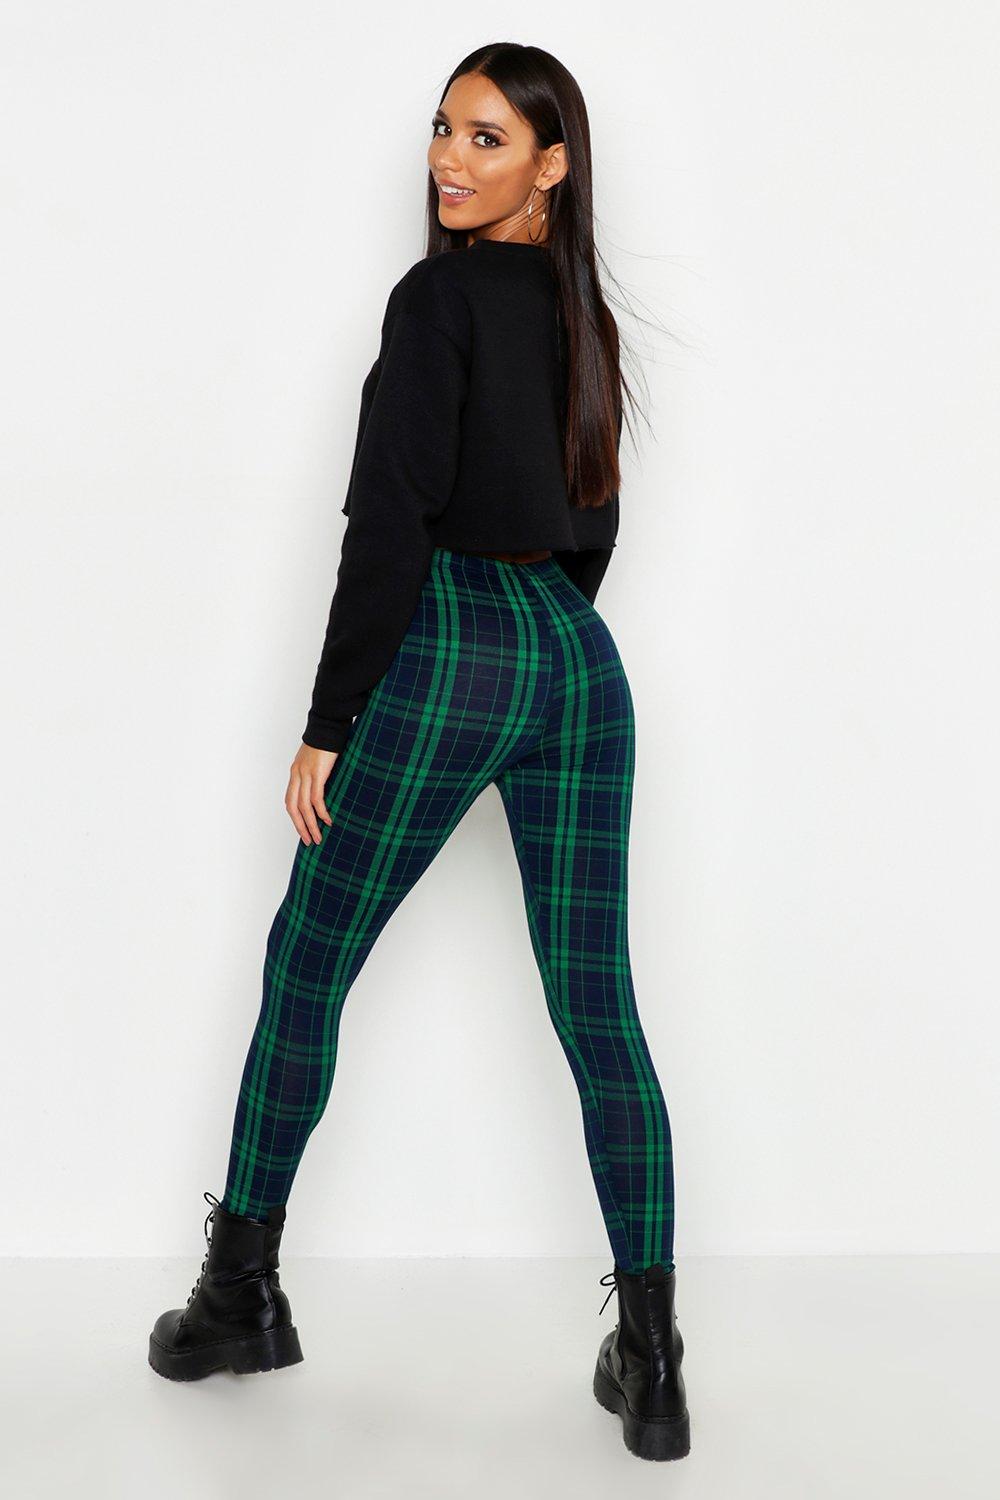 Green Plaid Patterned Tights For Women